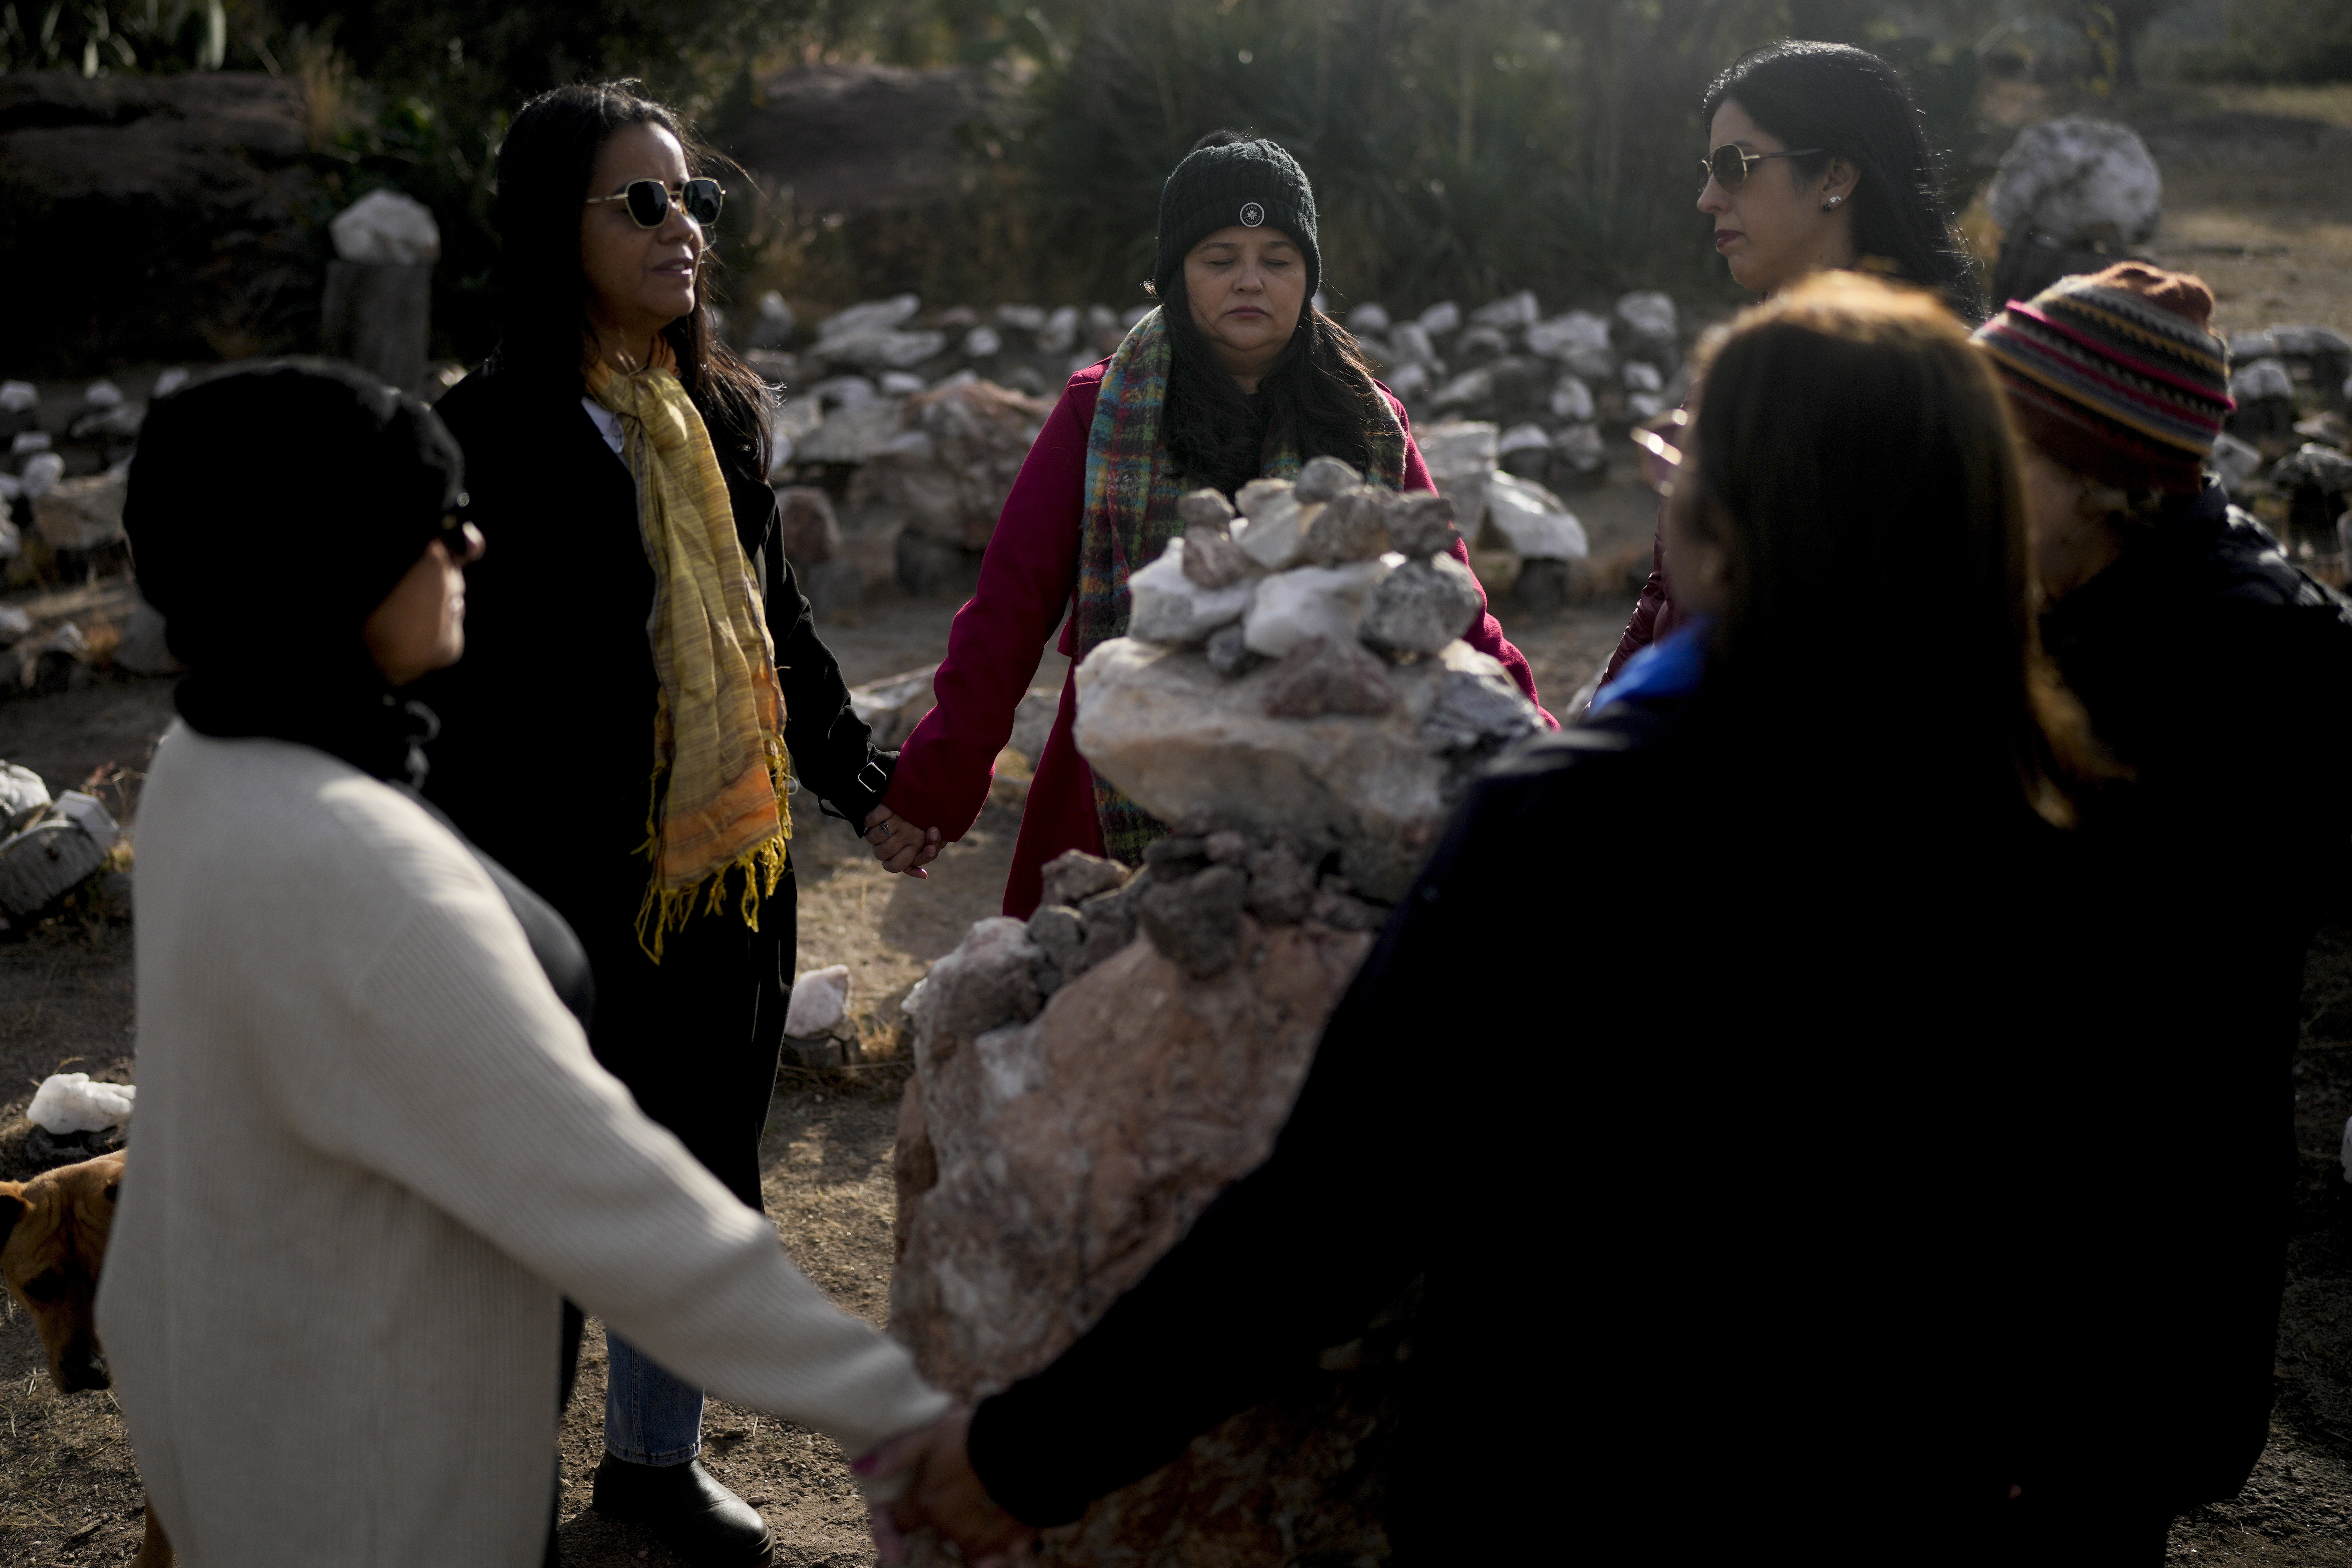 Brazilians Gilma Ribeiro, center, and Neiva Santos, second left, hold hands standing in a circle at the heart of a stone labyrinth in the Pueblo Encanto spiritual theme park in Capilla del Monte, Argentina, July 19. (AP/Natacha Pisarenko)